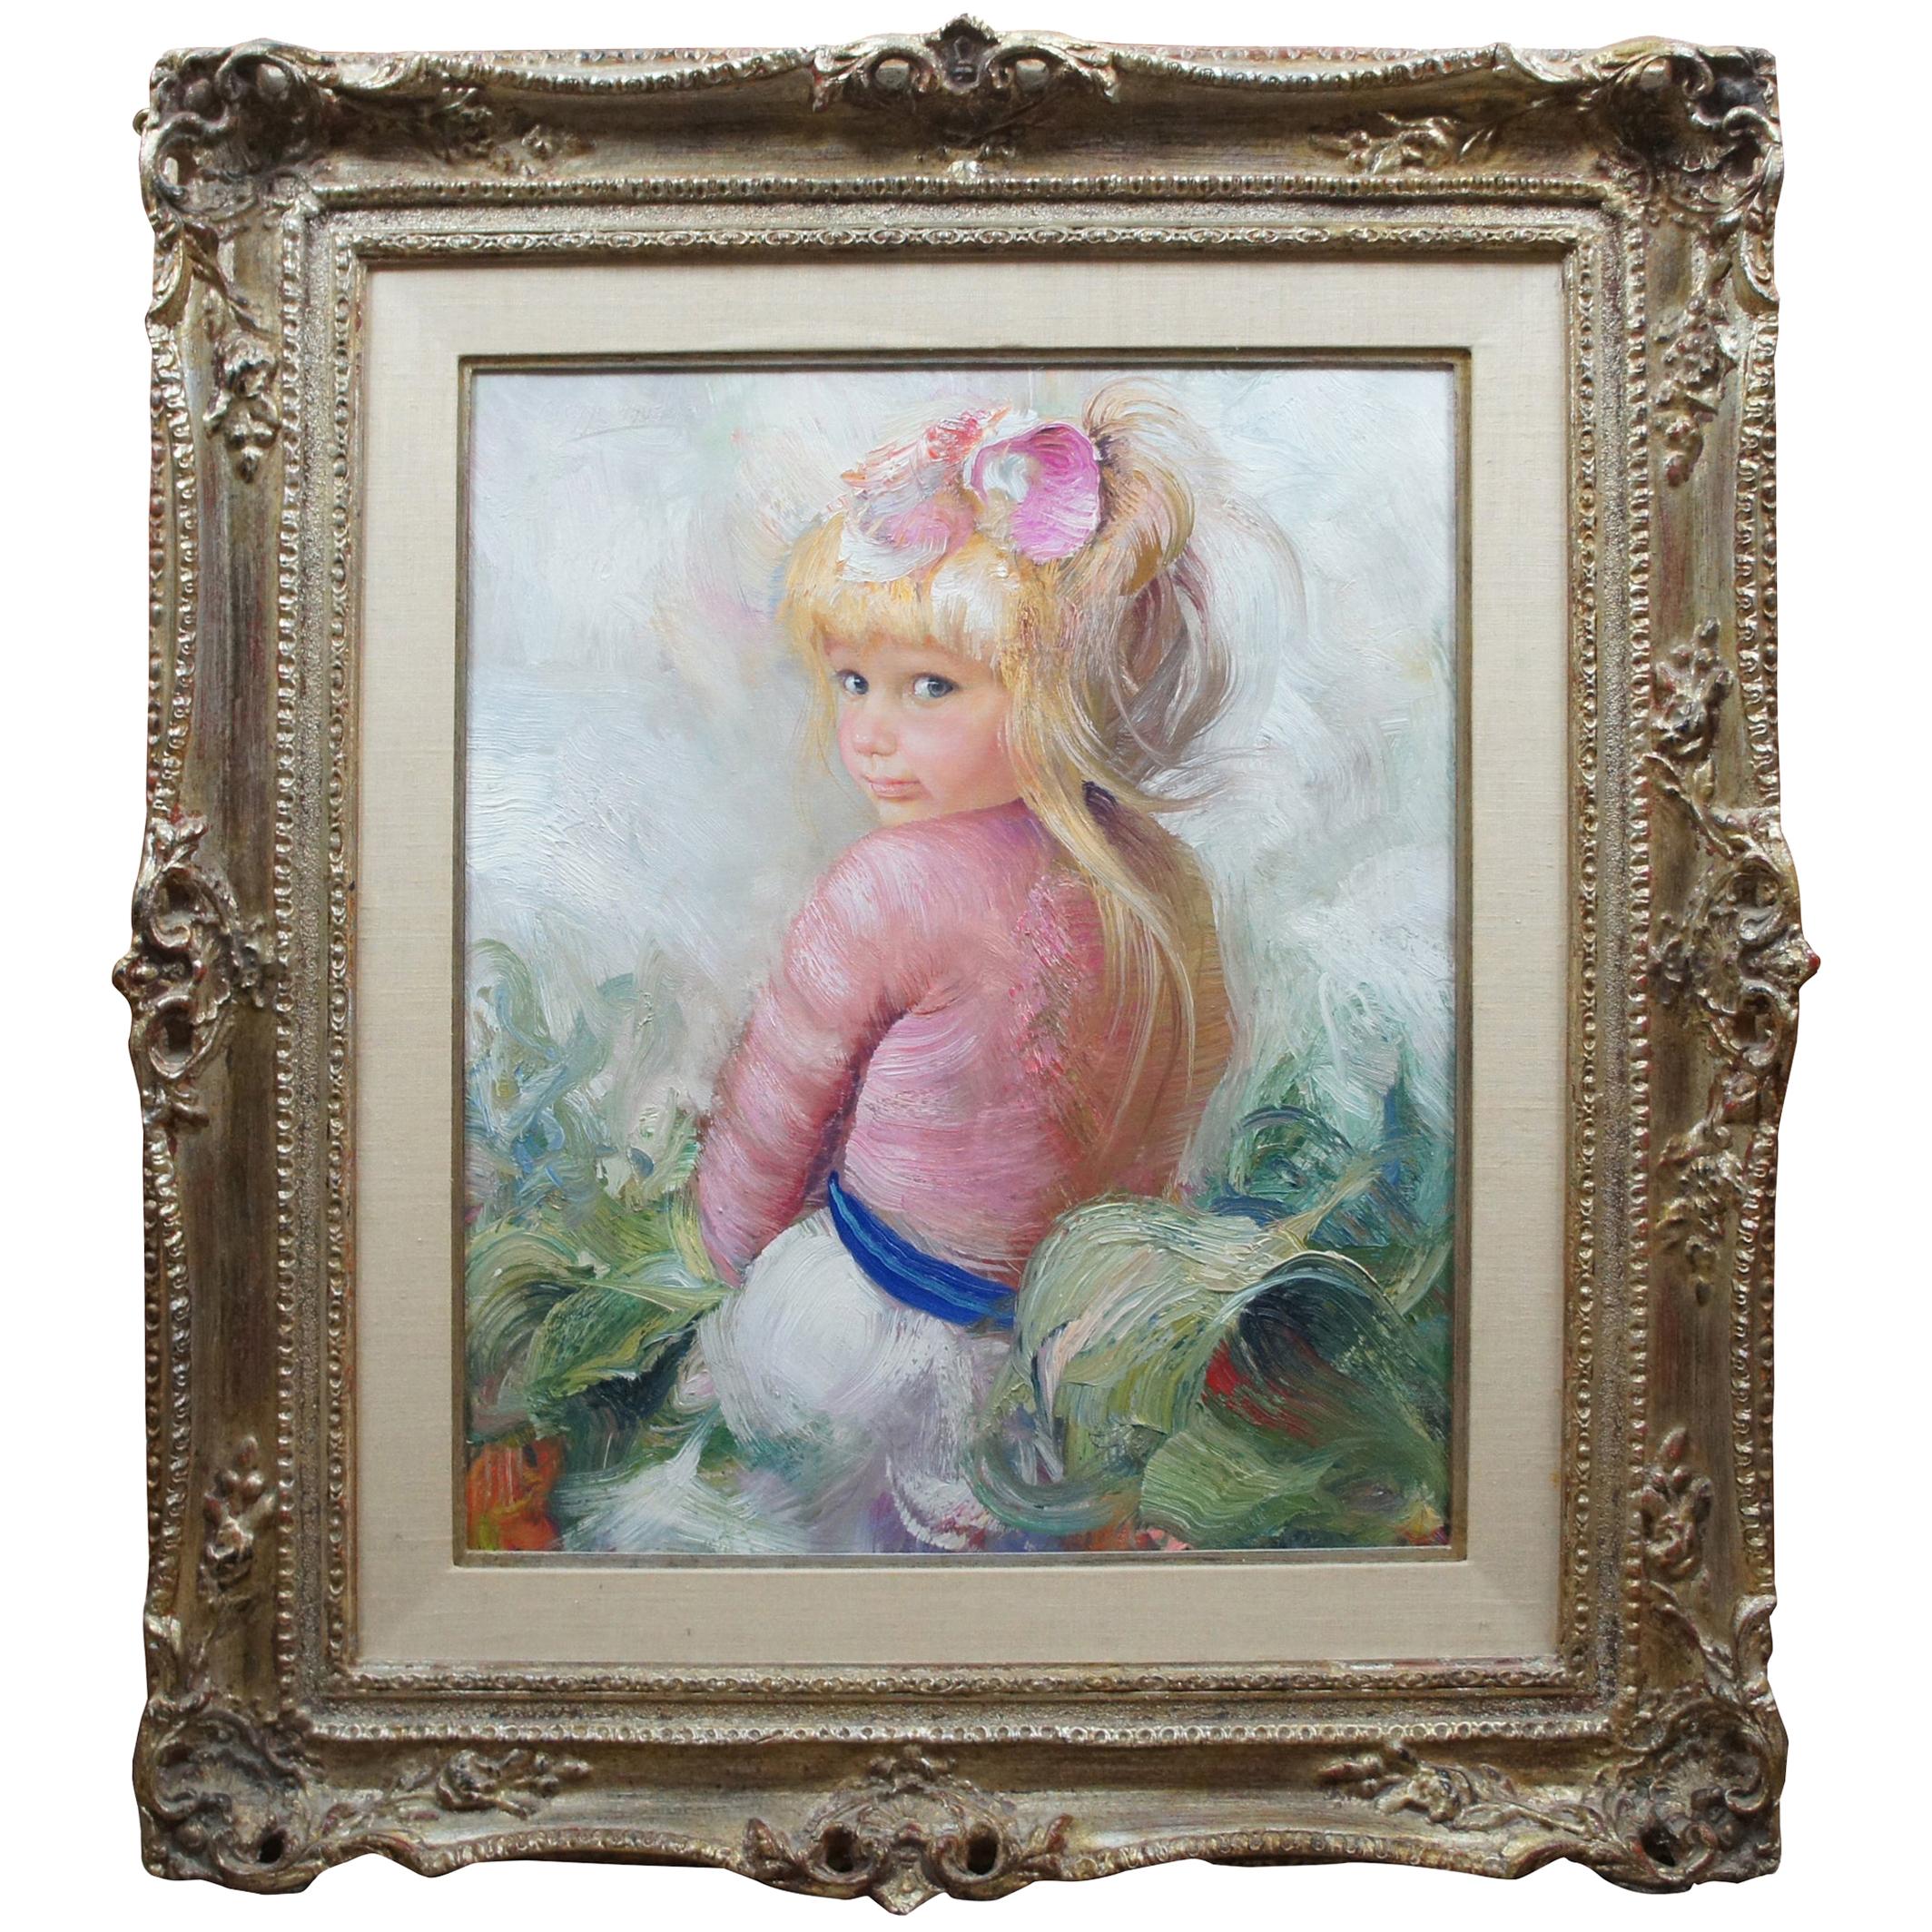 Francisco Masseria Original Oil Painting on Canvas Portrait of a Blonde Girl